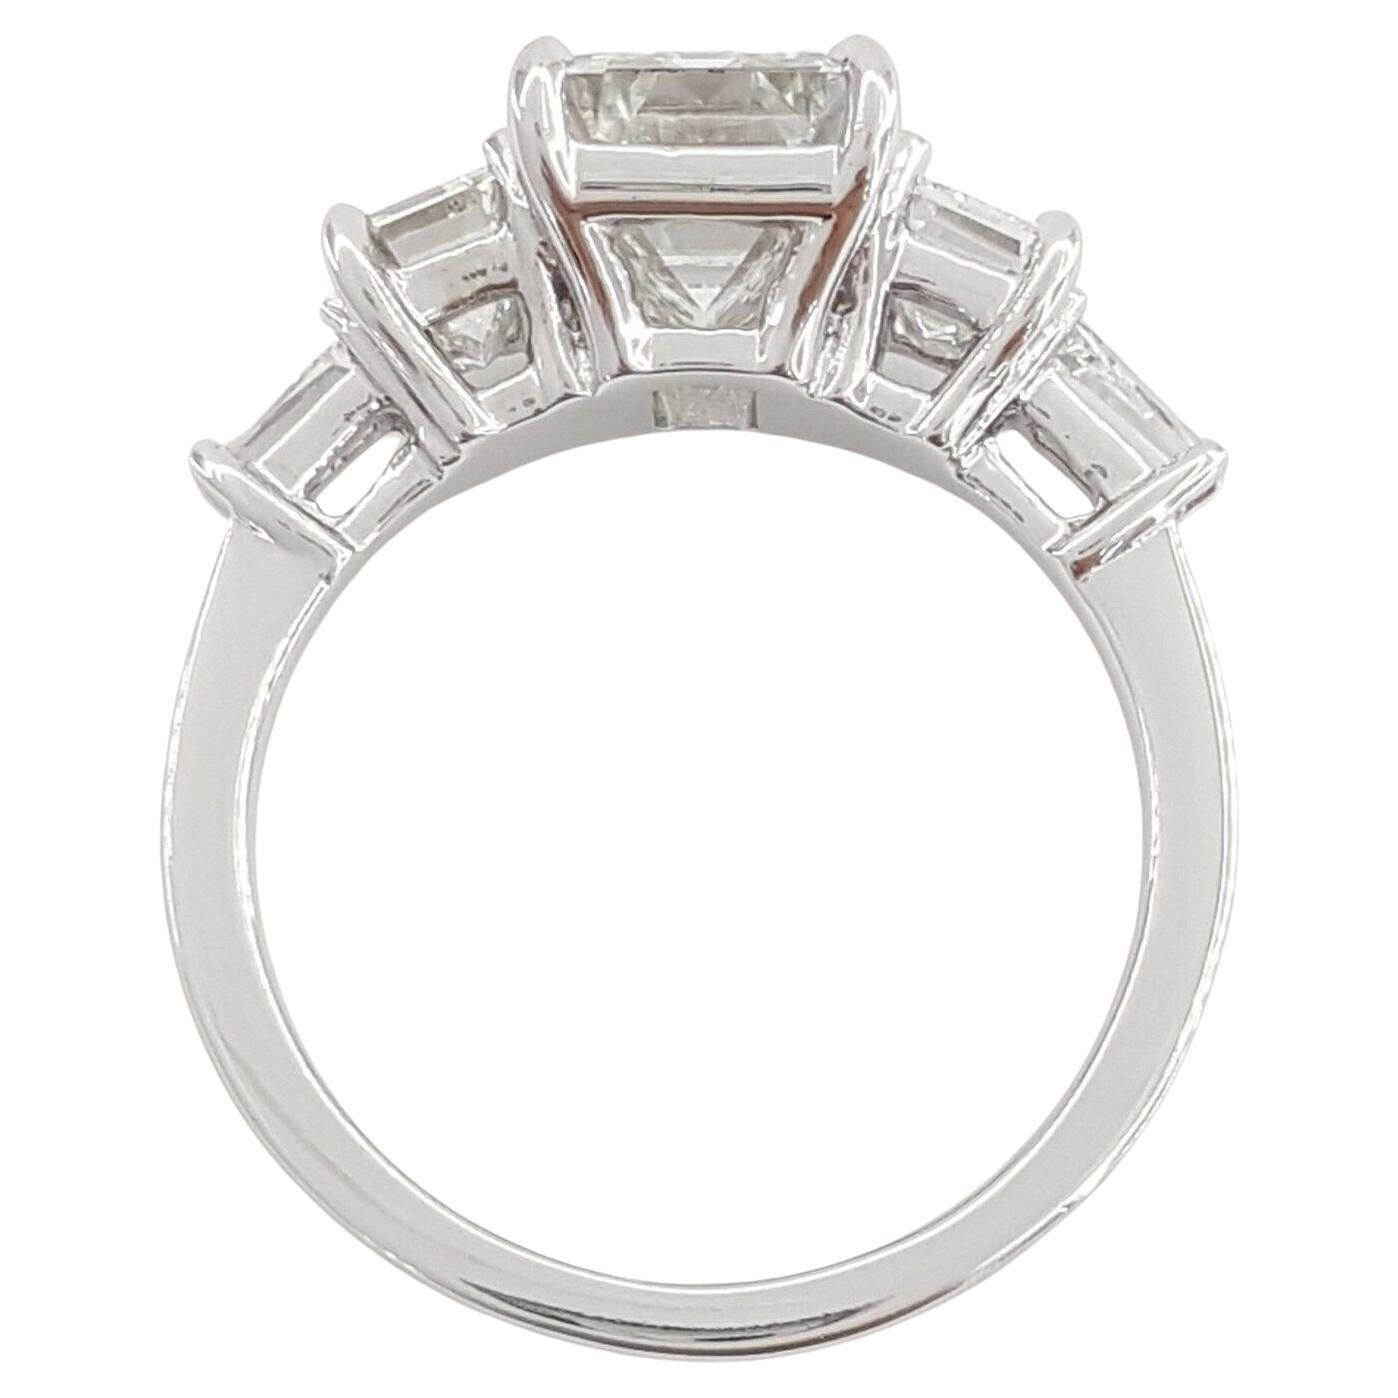 This platinum engagement ring features a total weight of 3.8 carats, comprising emerald and baguette cut diamonds. The ring itself weighs 7.2 grams and is size 6.5. Its centerpiece is a natural ideal emerald cut diamond, weighing 2.56 carats, with E